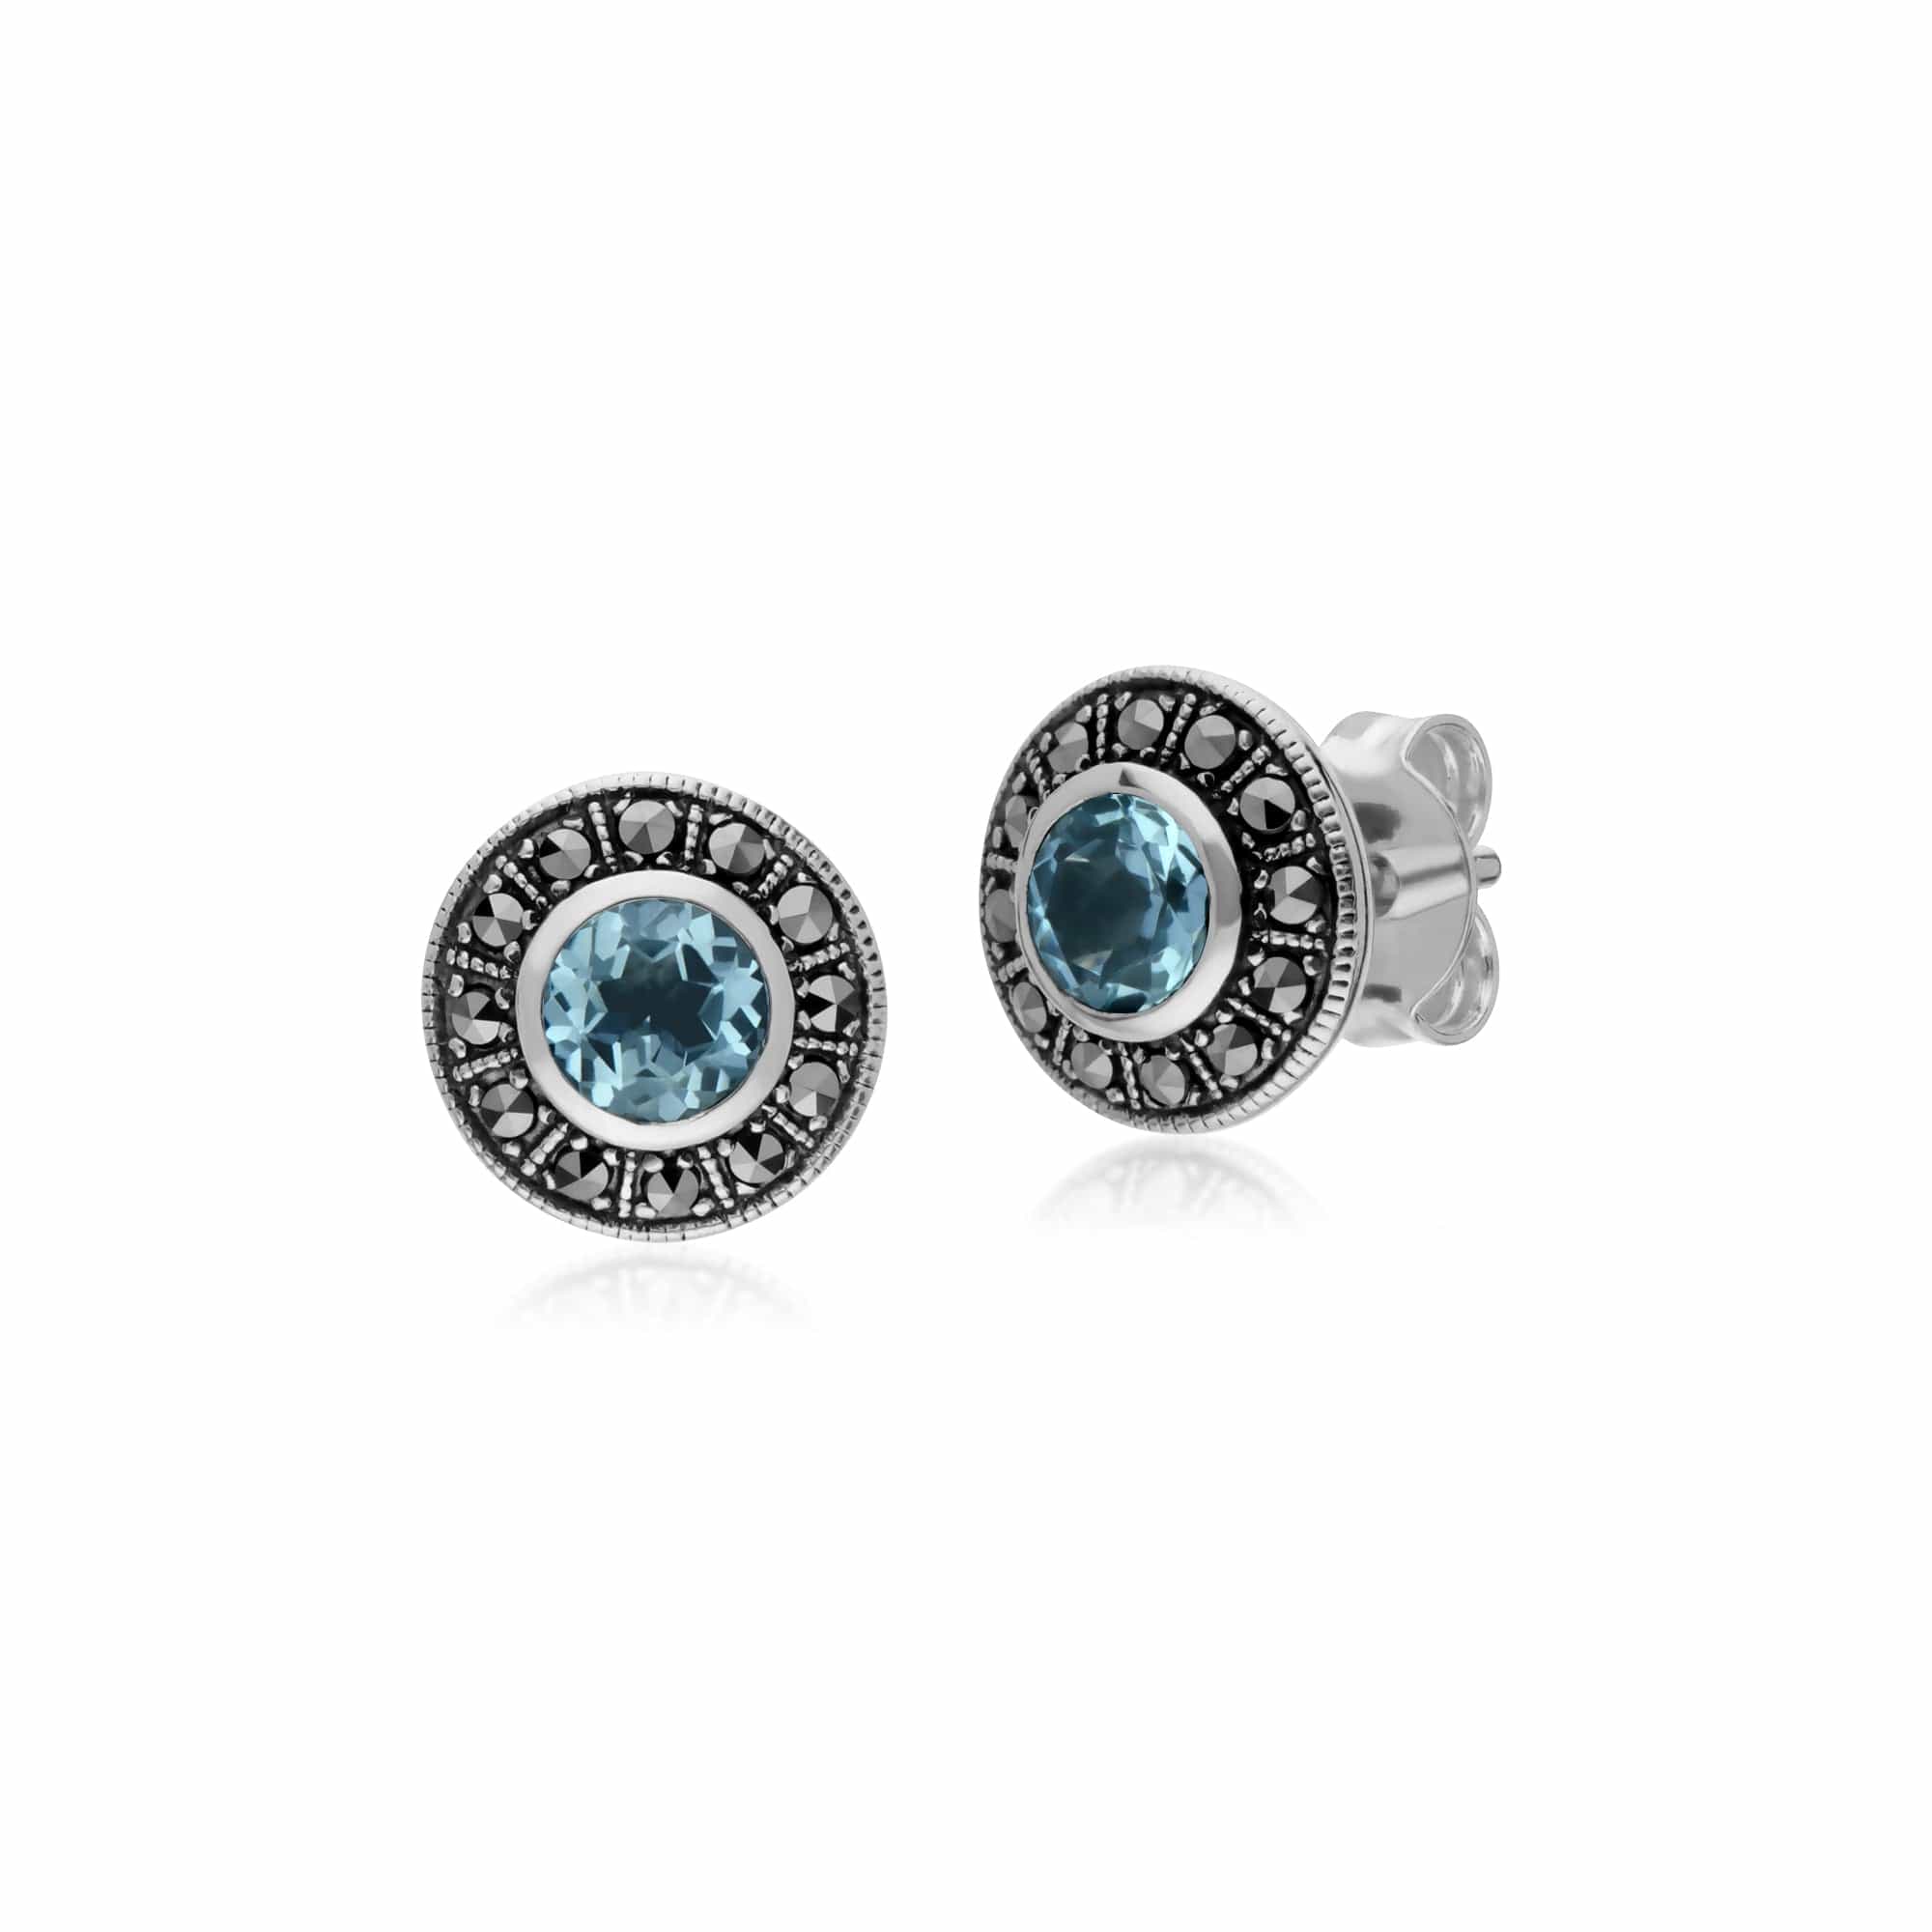 214E872702925 Gemondo Sterling Silver Round Blue Topaz and Marcasite Cluster Stud Earrings 1